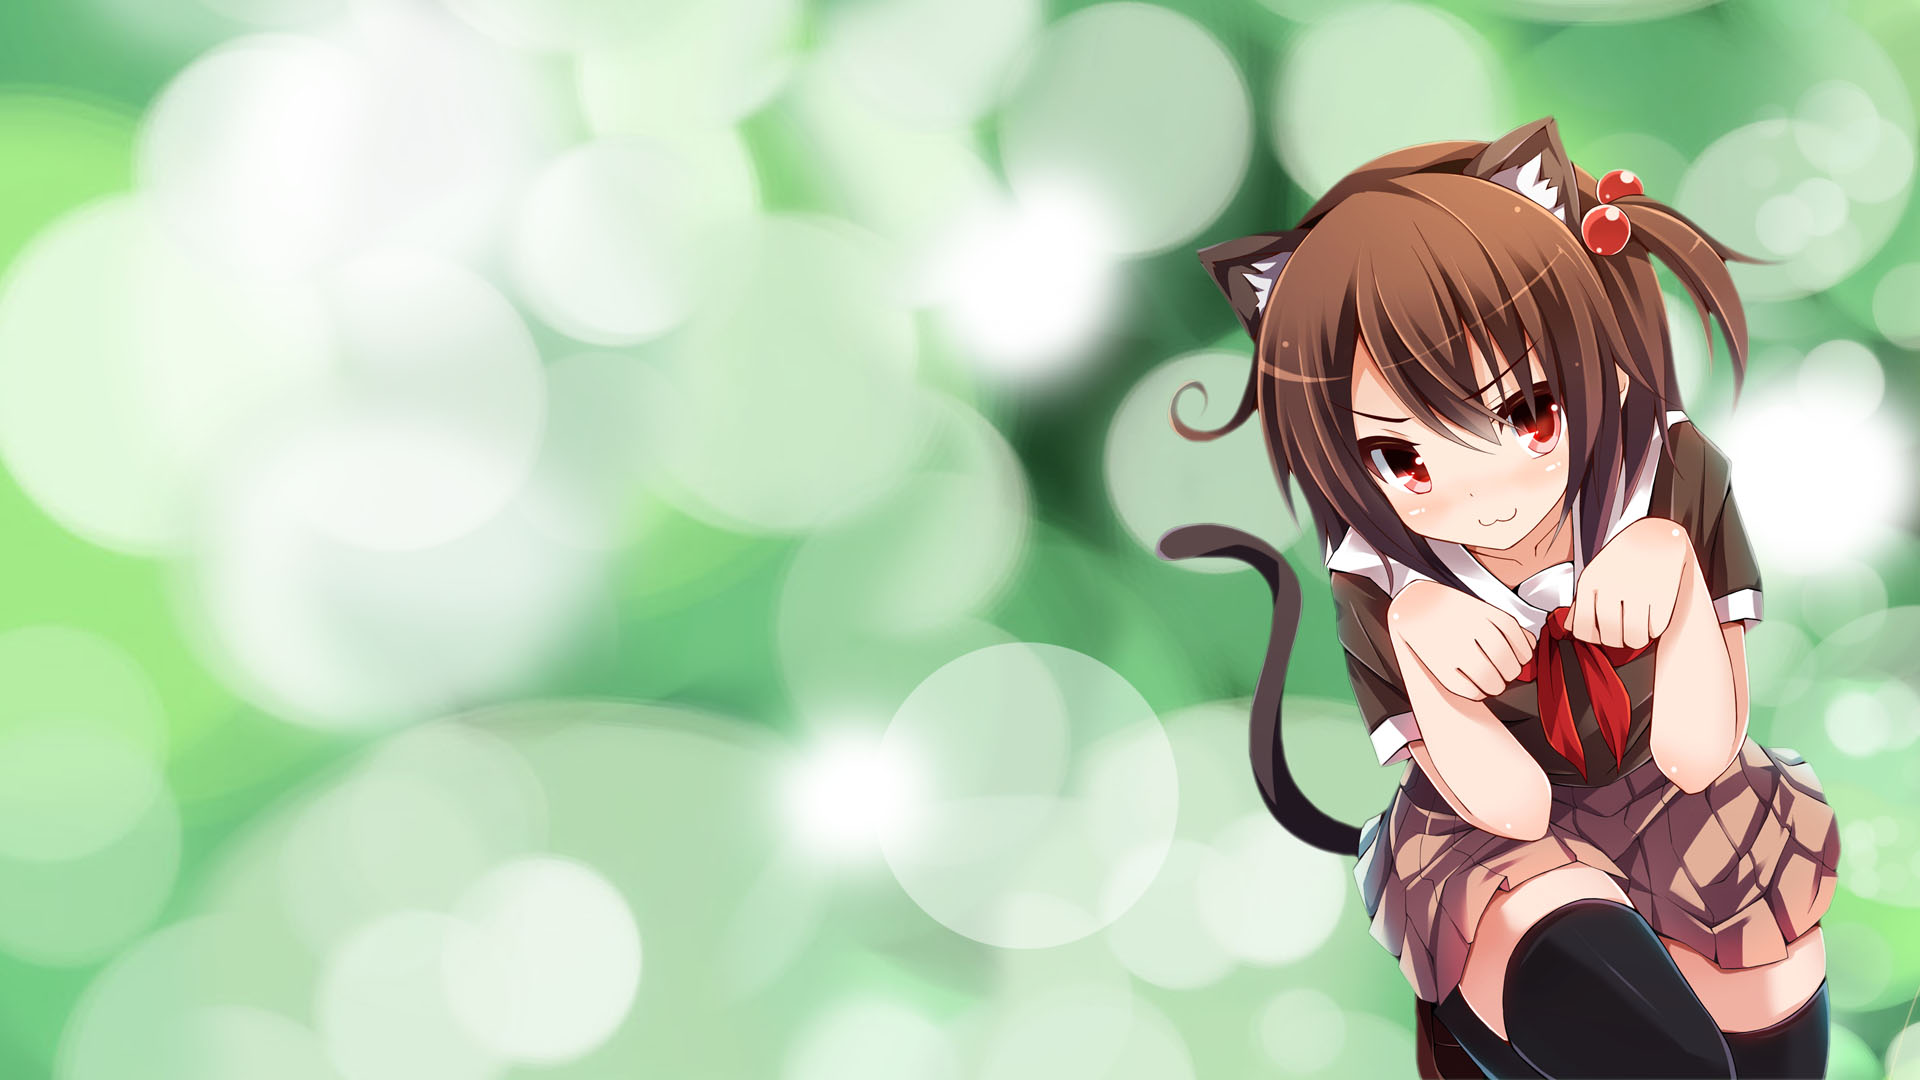 170+ Cat Girl Hd Wallpapers And Backgrounds